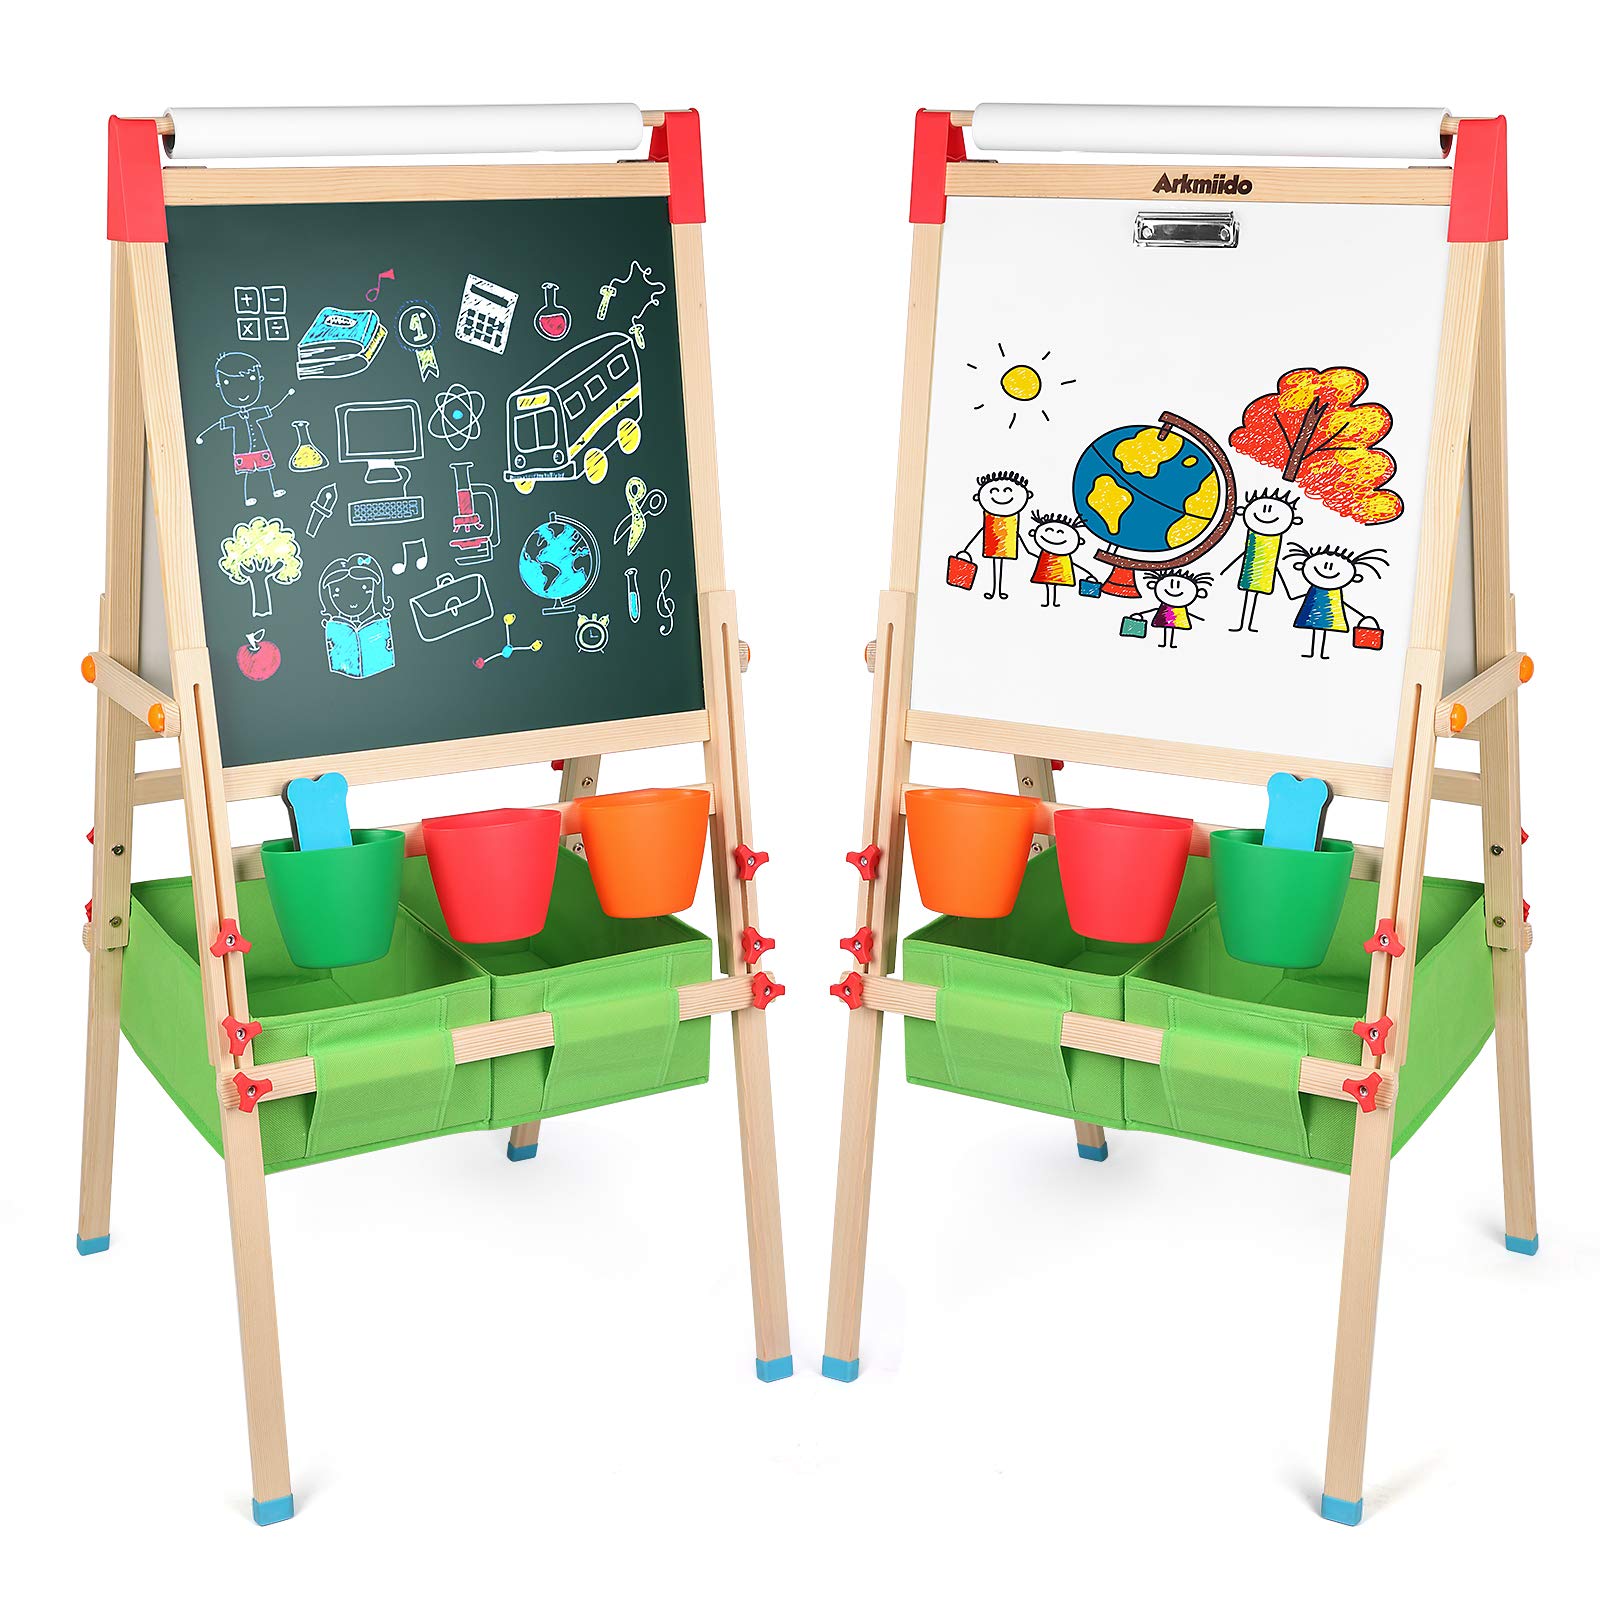 FOSUBOO Arkmiido 4in1 Wooden Kid’s Art Easel with Paper Roll Double-Sided Easel Blackboard and White Easel Painting Magnetic Wooden Board with Storage Box for Children Educational Toy Featured Image